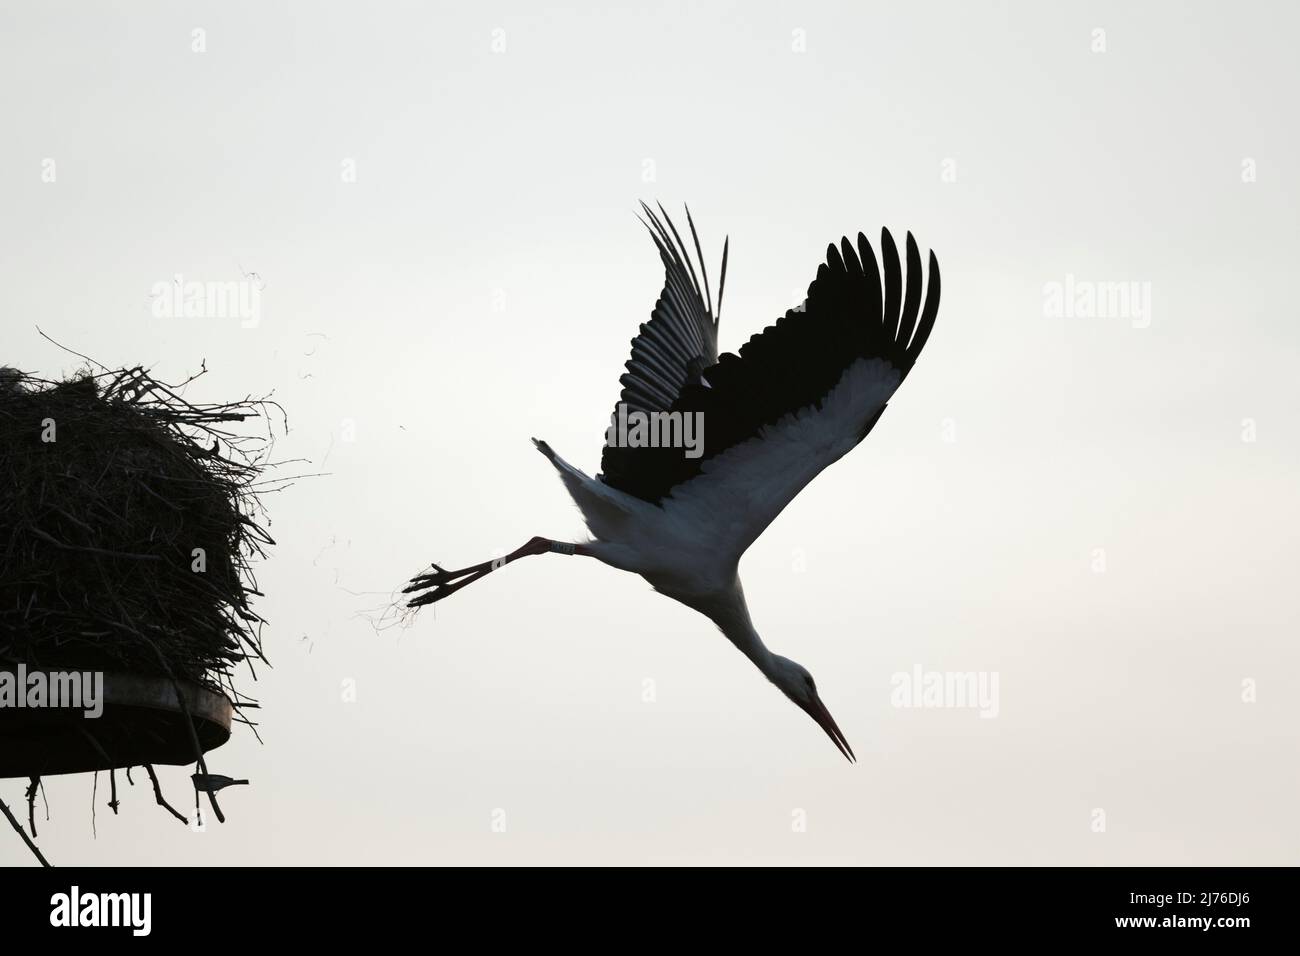 White stork (Ciconia ciconia) taking off from nest, spring, Hesse, Germany, Europe Stock Photo